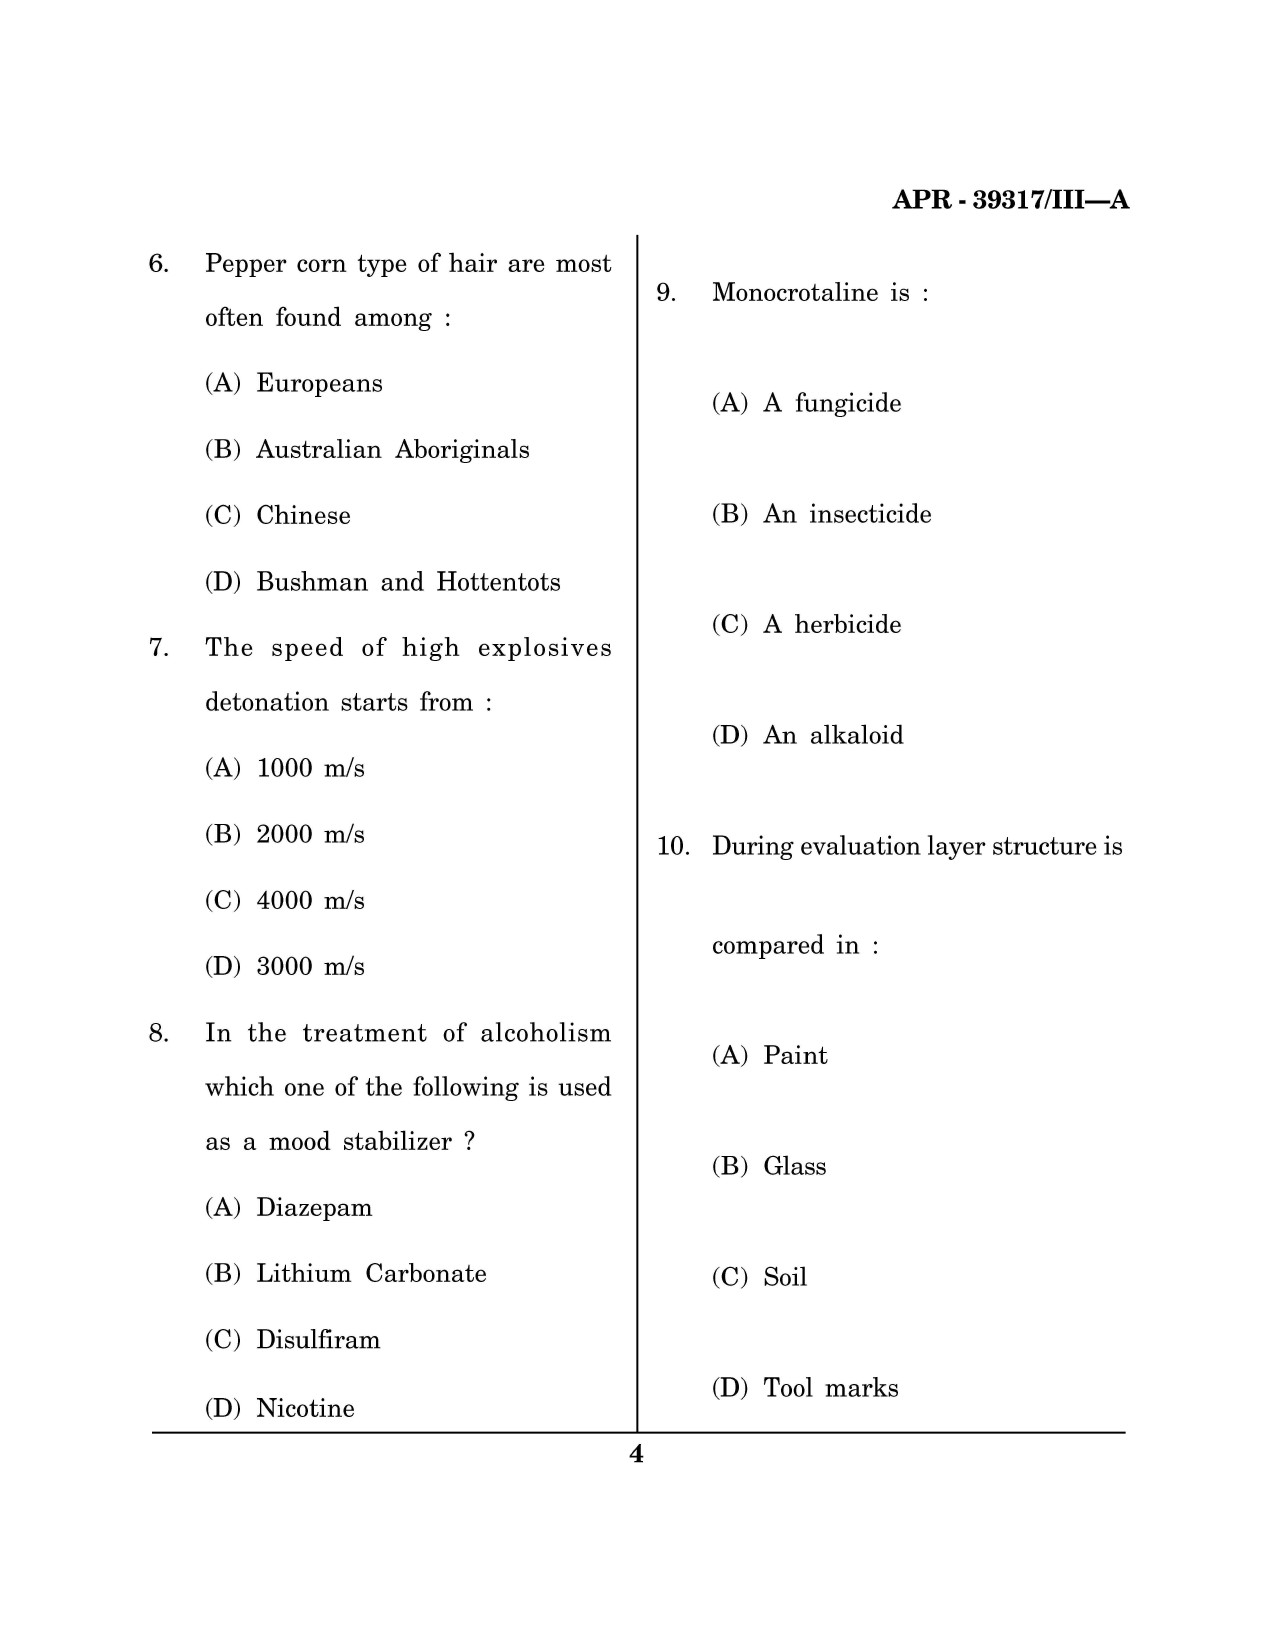 Maharashtra SET Forensic Science Question Paper III April 2017 3